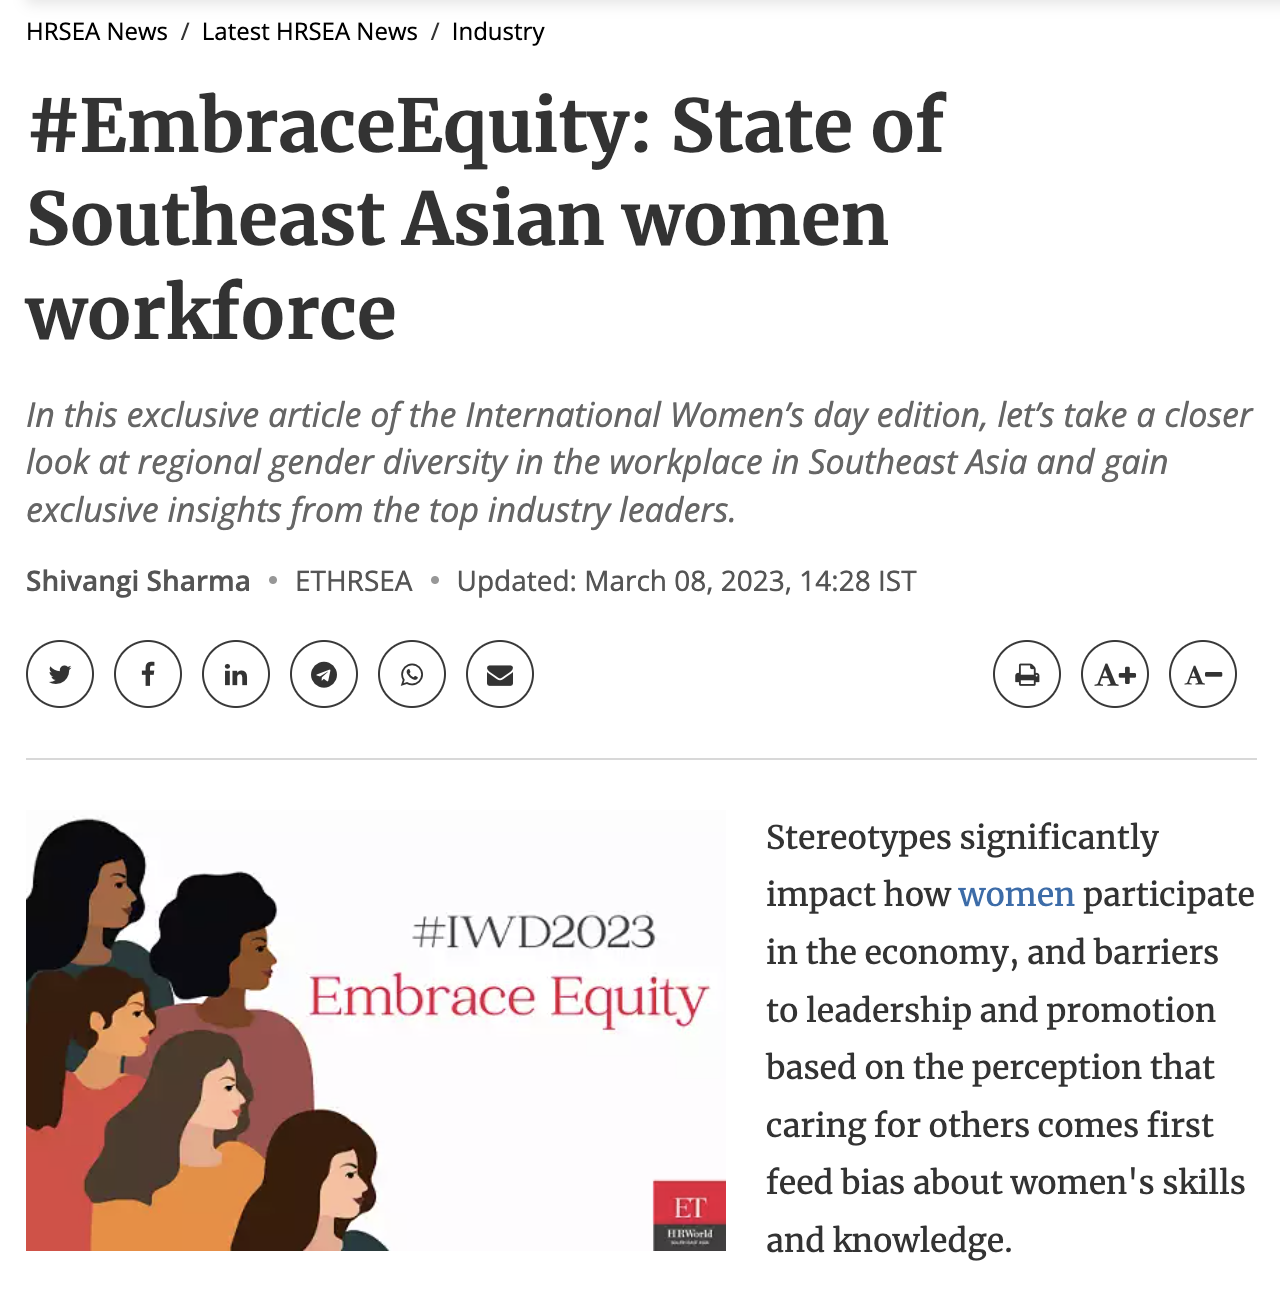 https://hrsea.economictimes.indiatimes.com/news/industry/embraceequity-state-of-southeast-asian-women-workforce/98479891